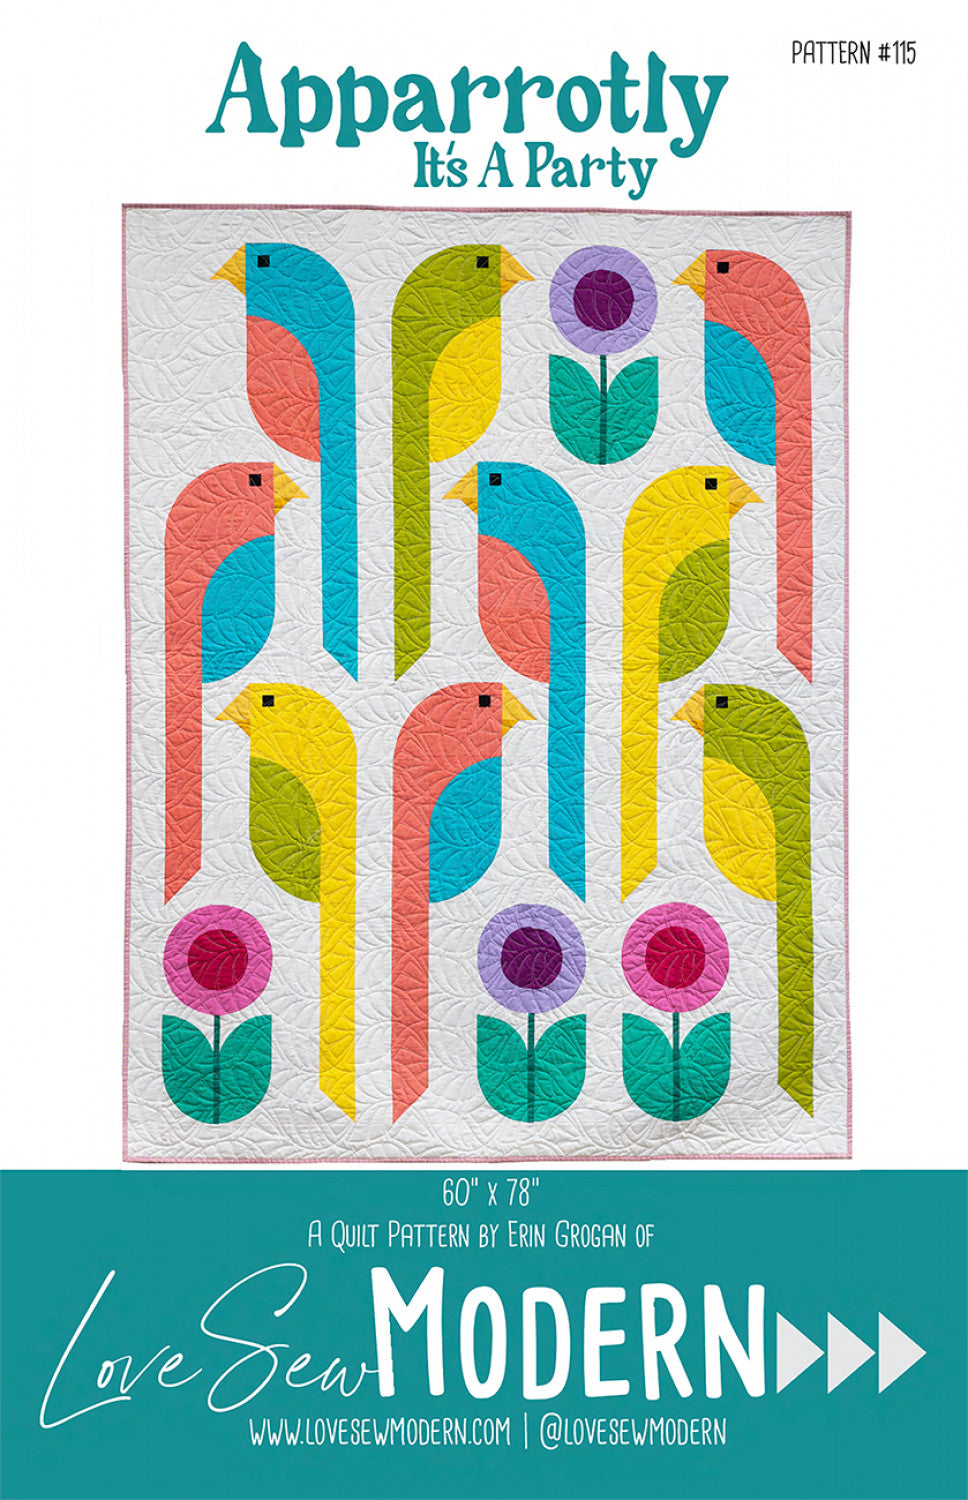 Apparrotly It's A Party Quilt Pattern by Erin Grogan for Love Sew Modern